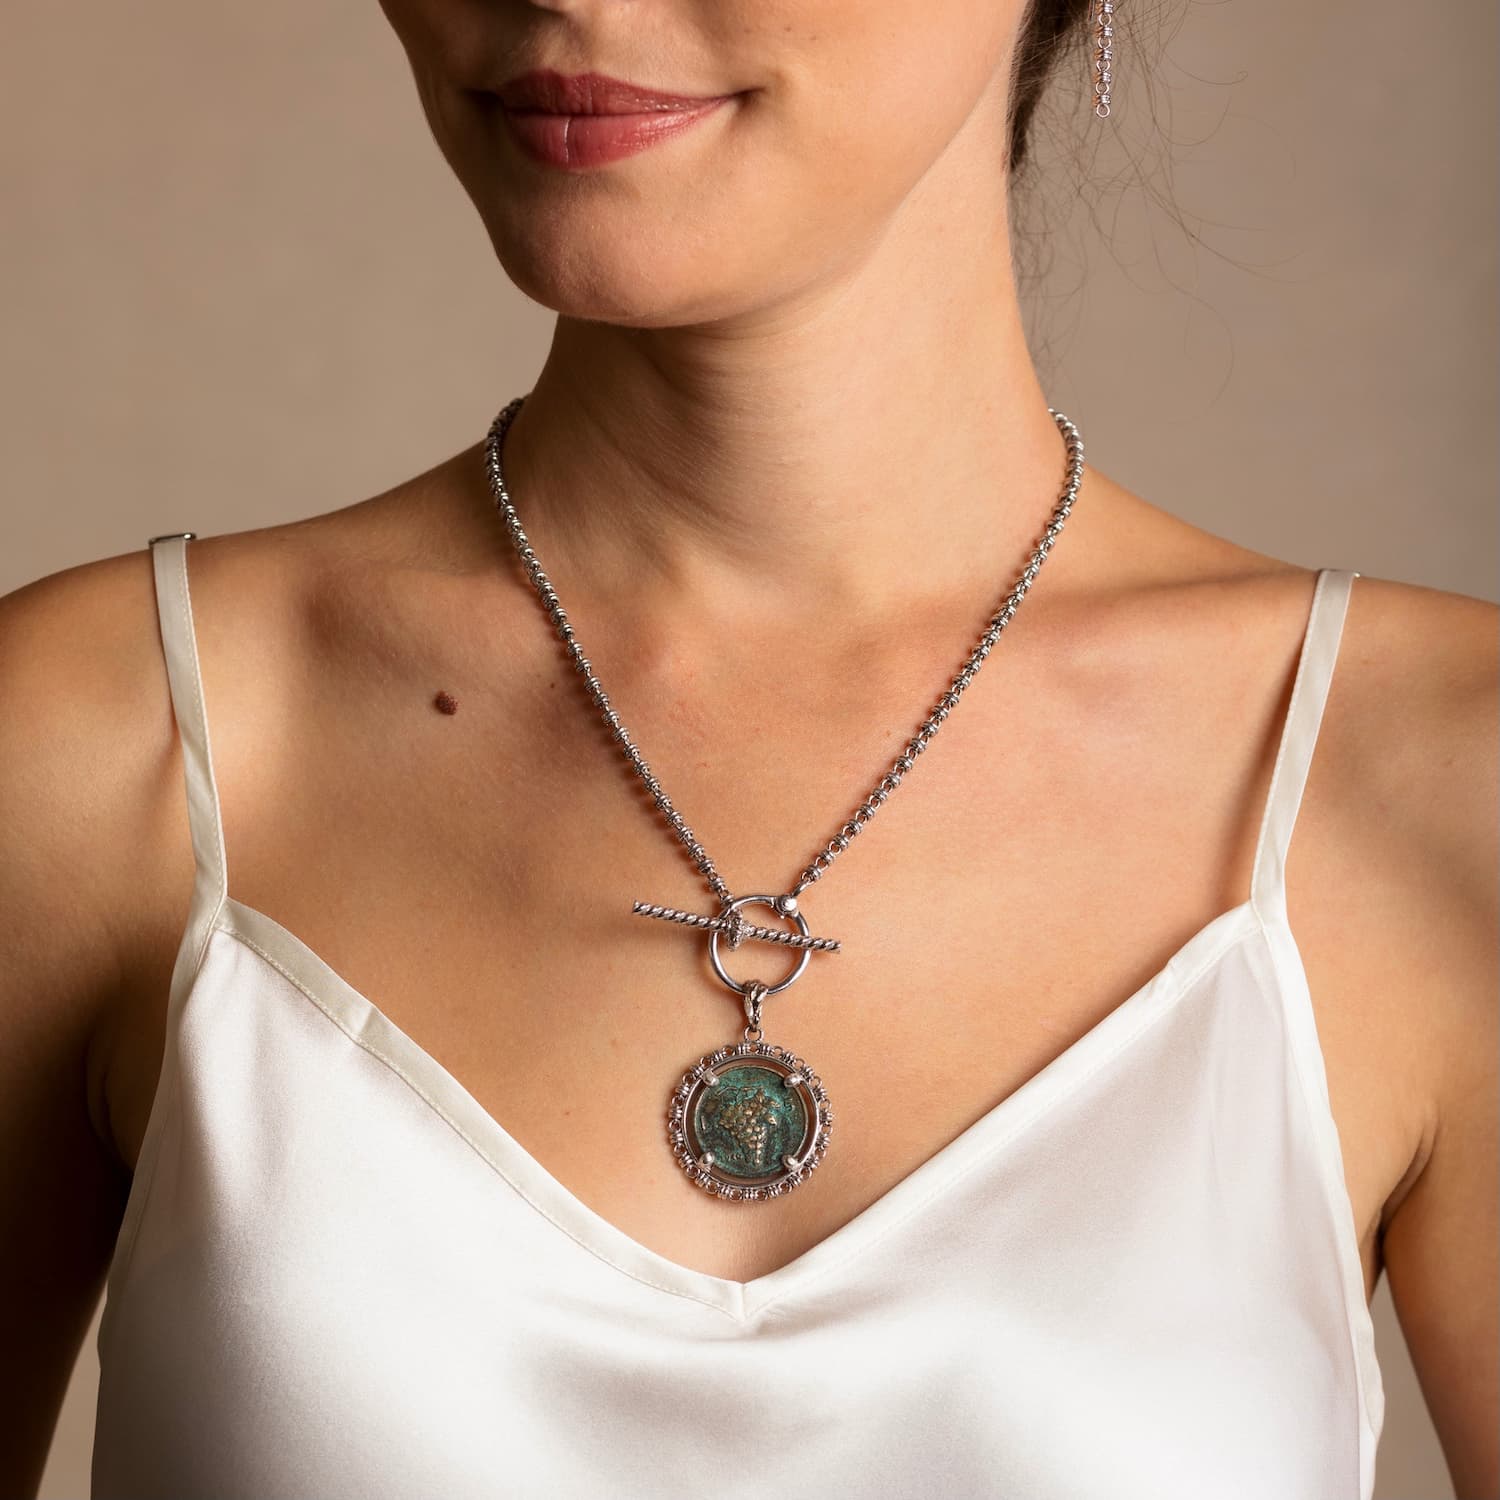 A model wearing a silver necklace with a toggle clasp, a coin pendant, and silver earrings to match the silver chain in the necklace - both from the Links 3mm collection from DelBrenna Italian Jewelry designers and artisans. Hand-crafted in Tuscany.